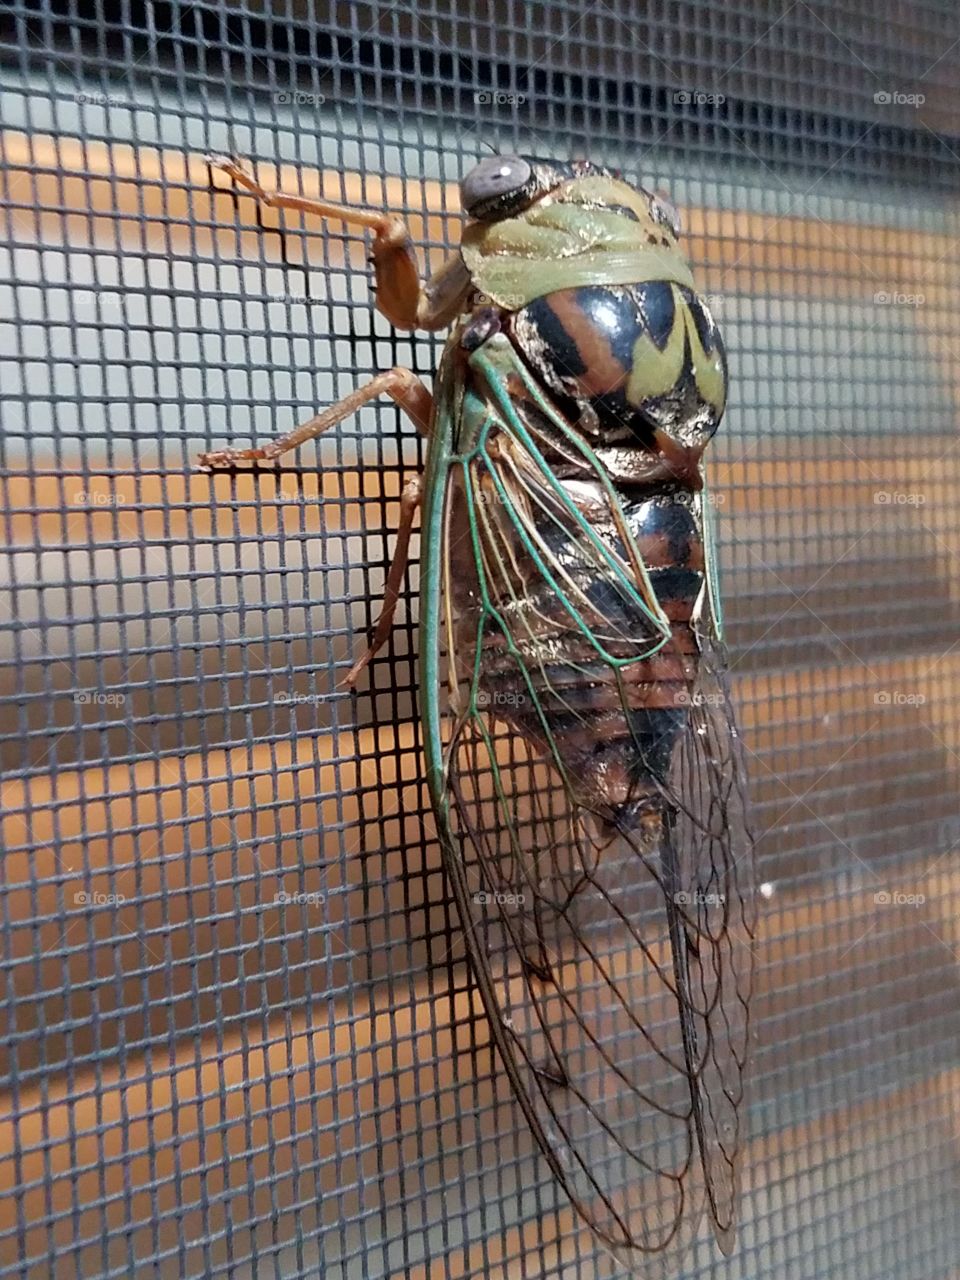 A cicada in the flesh. Well, the new flesh.. he has just shed his skin to reveal mesmerizing patterns.